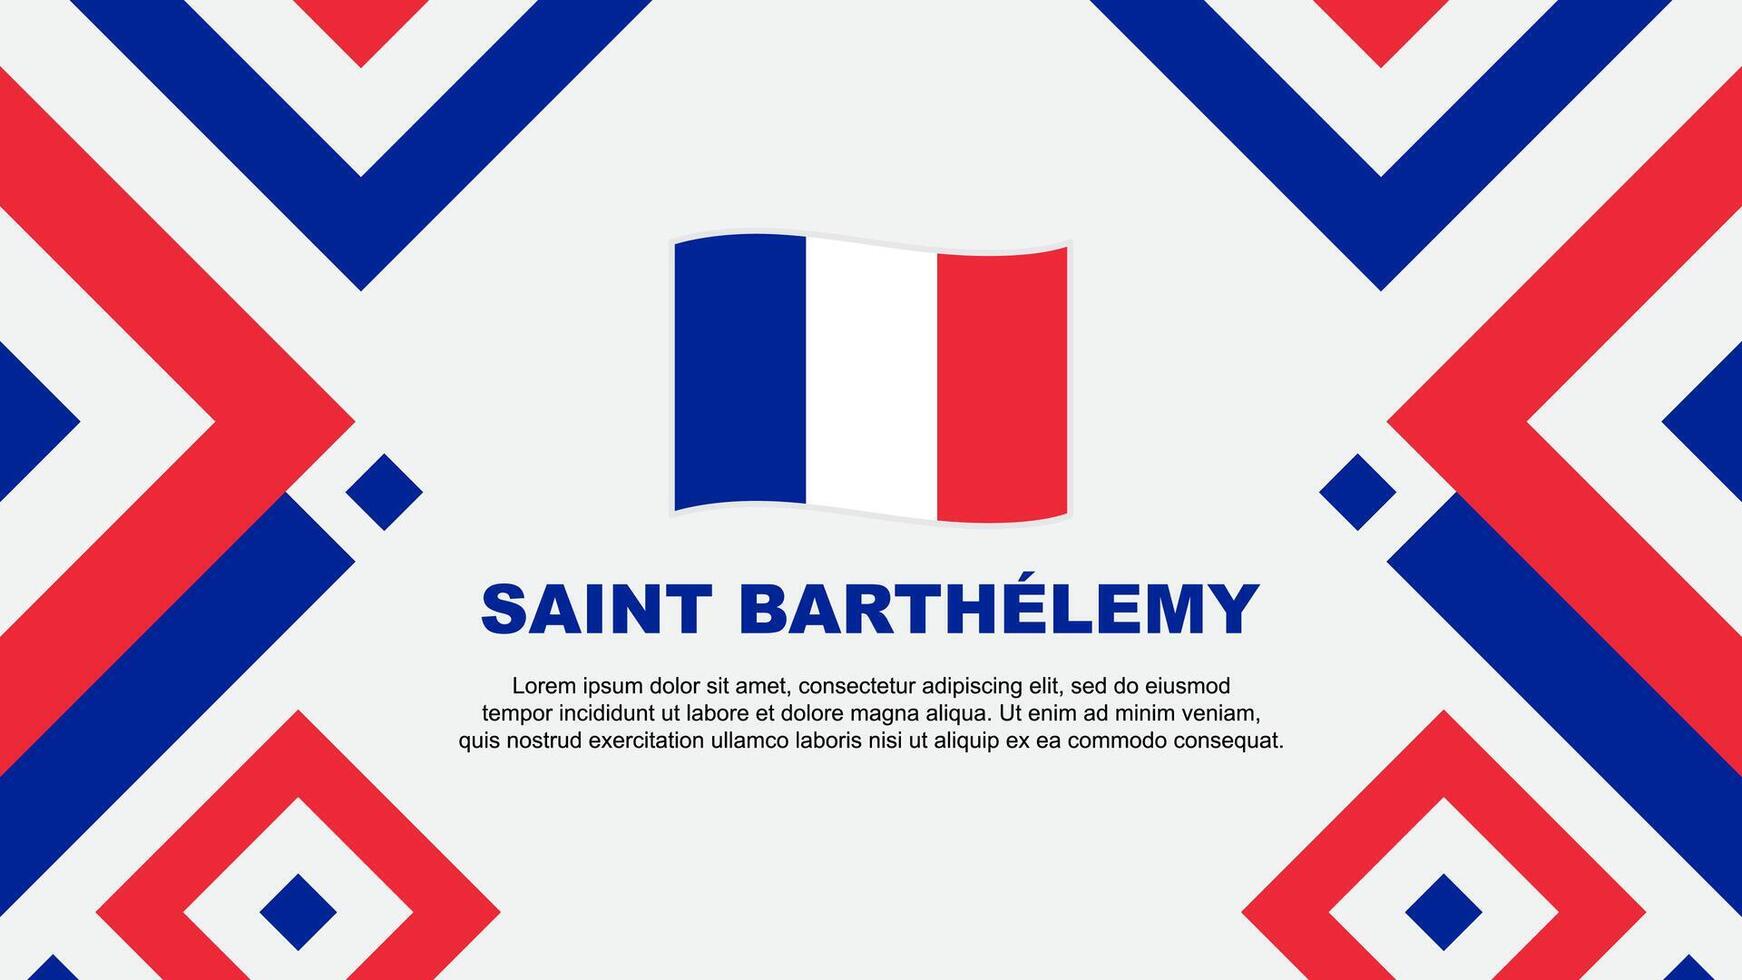 Saint Barthelemy Flag Abstract Background Design Template. Saint Barthelemy Independence Day Banner Wallpaper Vector Illustration. Template